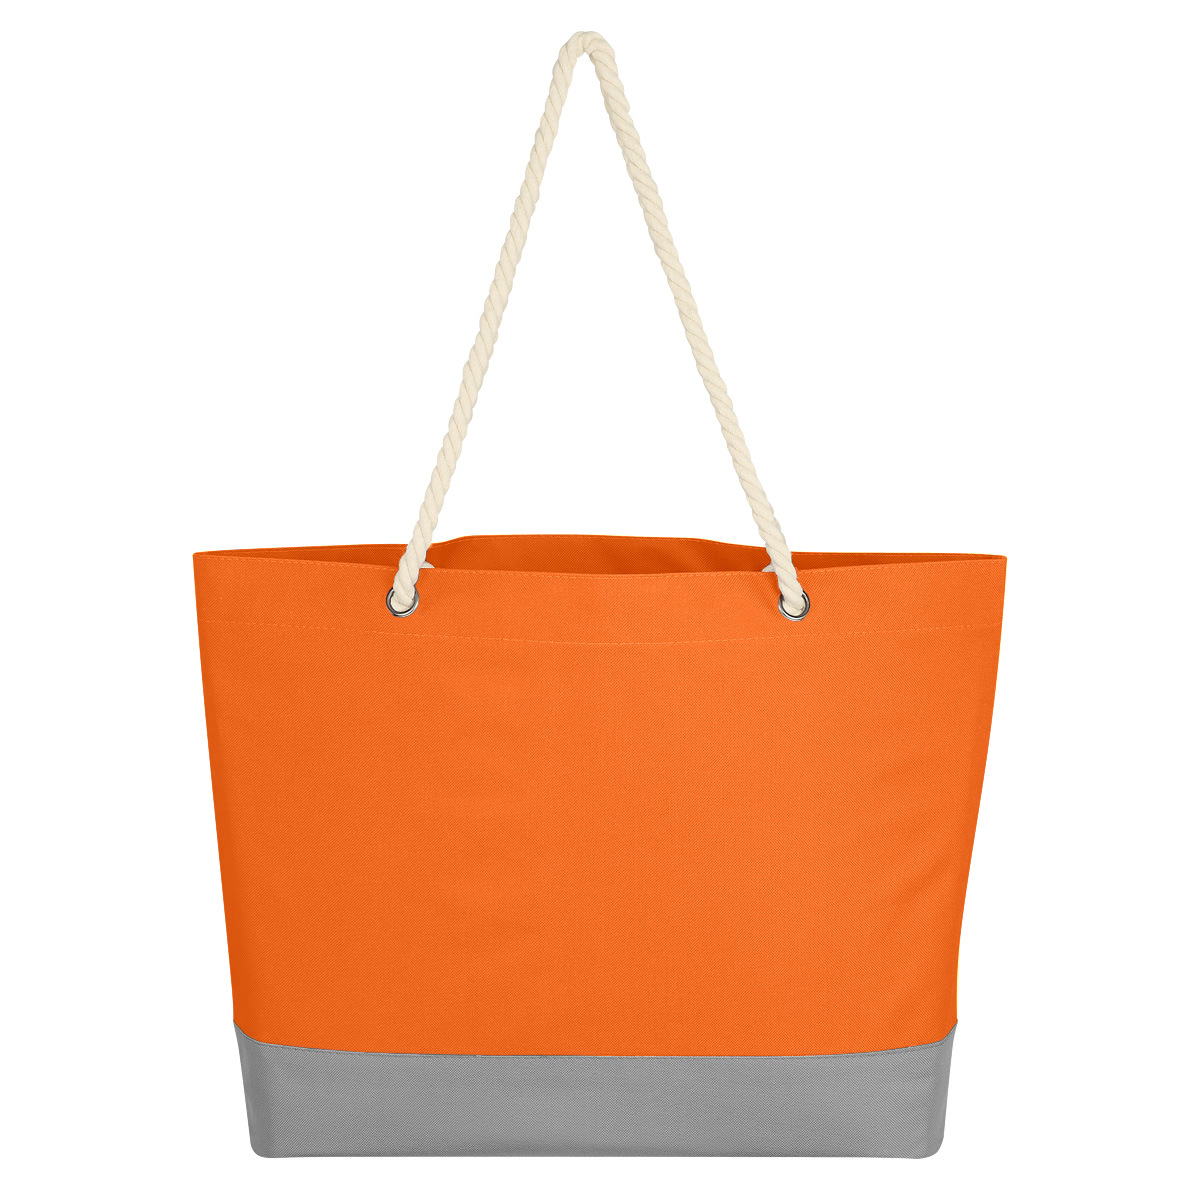 New-Recycle-Souvenir-Nylon-Oxford-Tote-Bag-600d-Polyester-Nylon-Shopping-Tote-Bag-with-Eyelet-Rope-String (2)